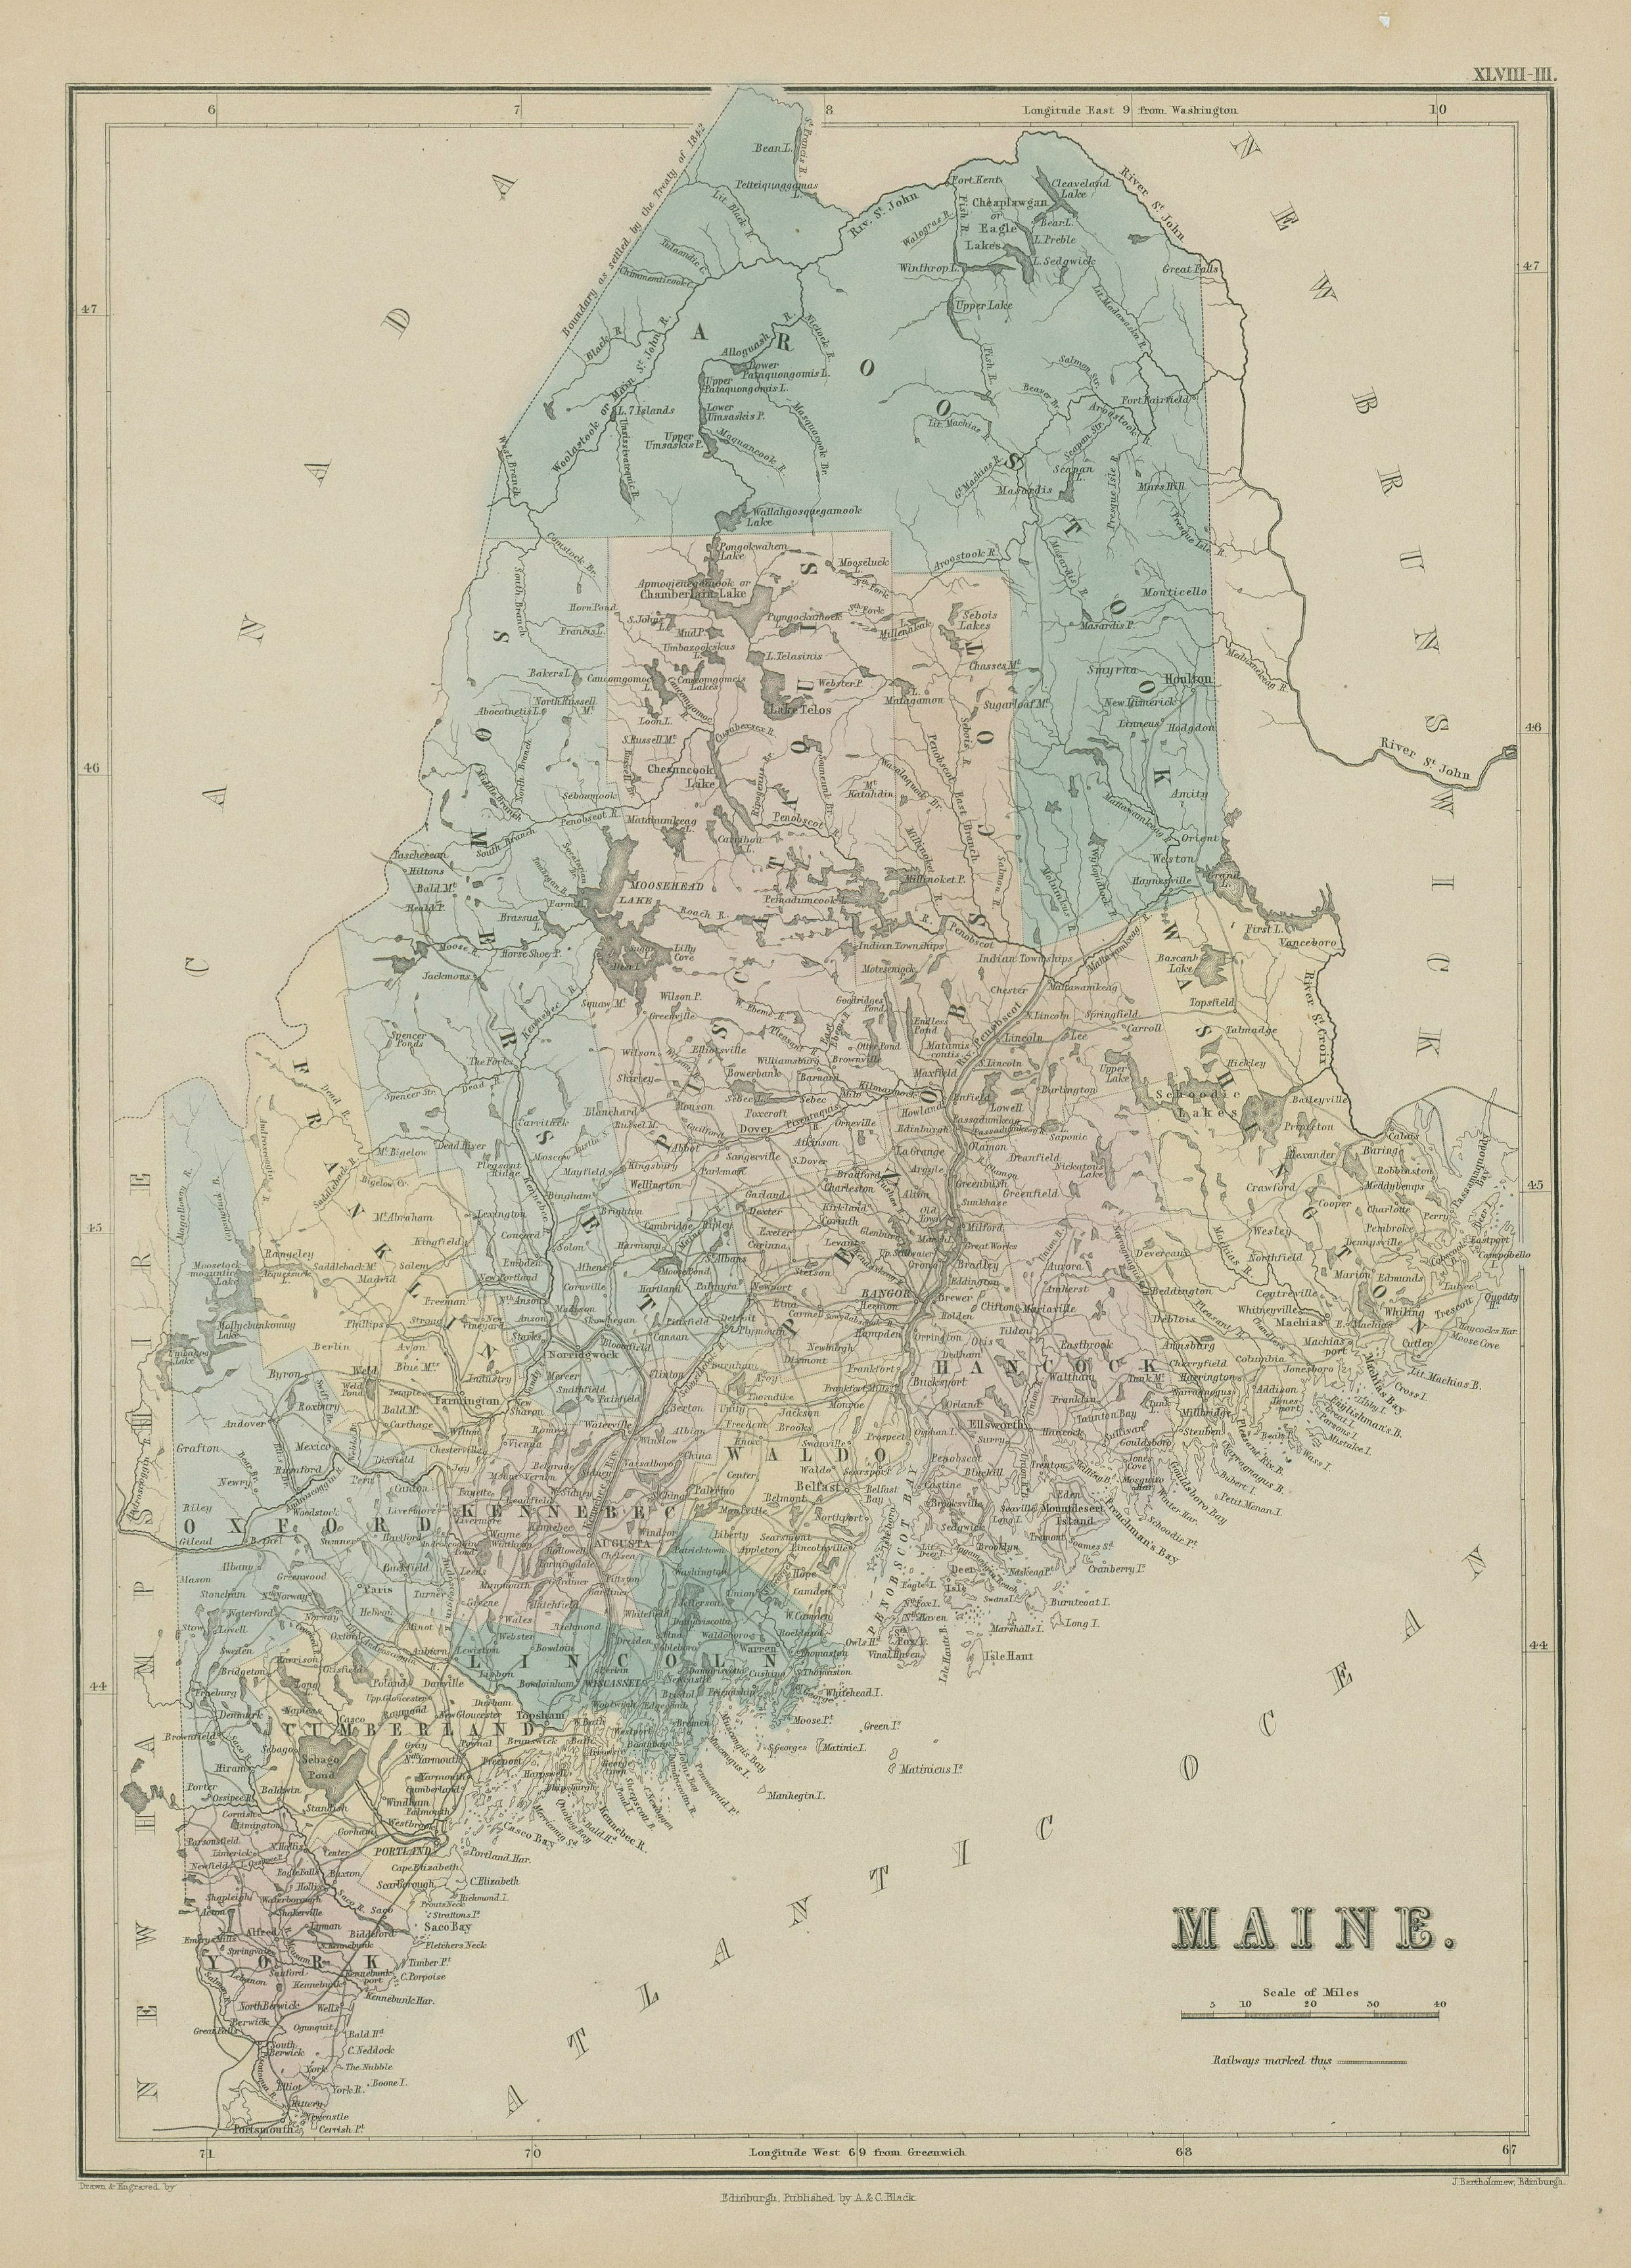 Associate Product Maine state map showing counties. JOHN BARTHOLOMEW 1856 old antique chart